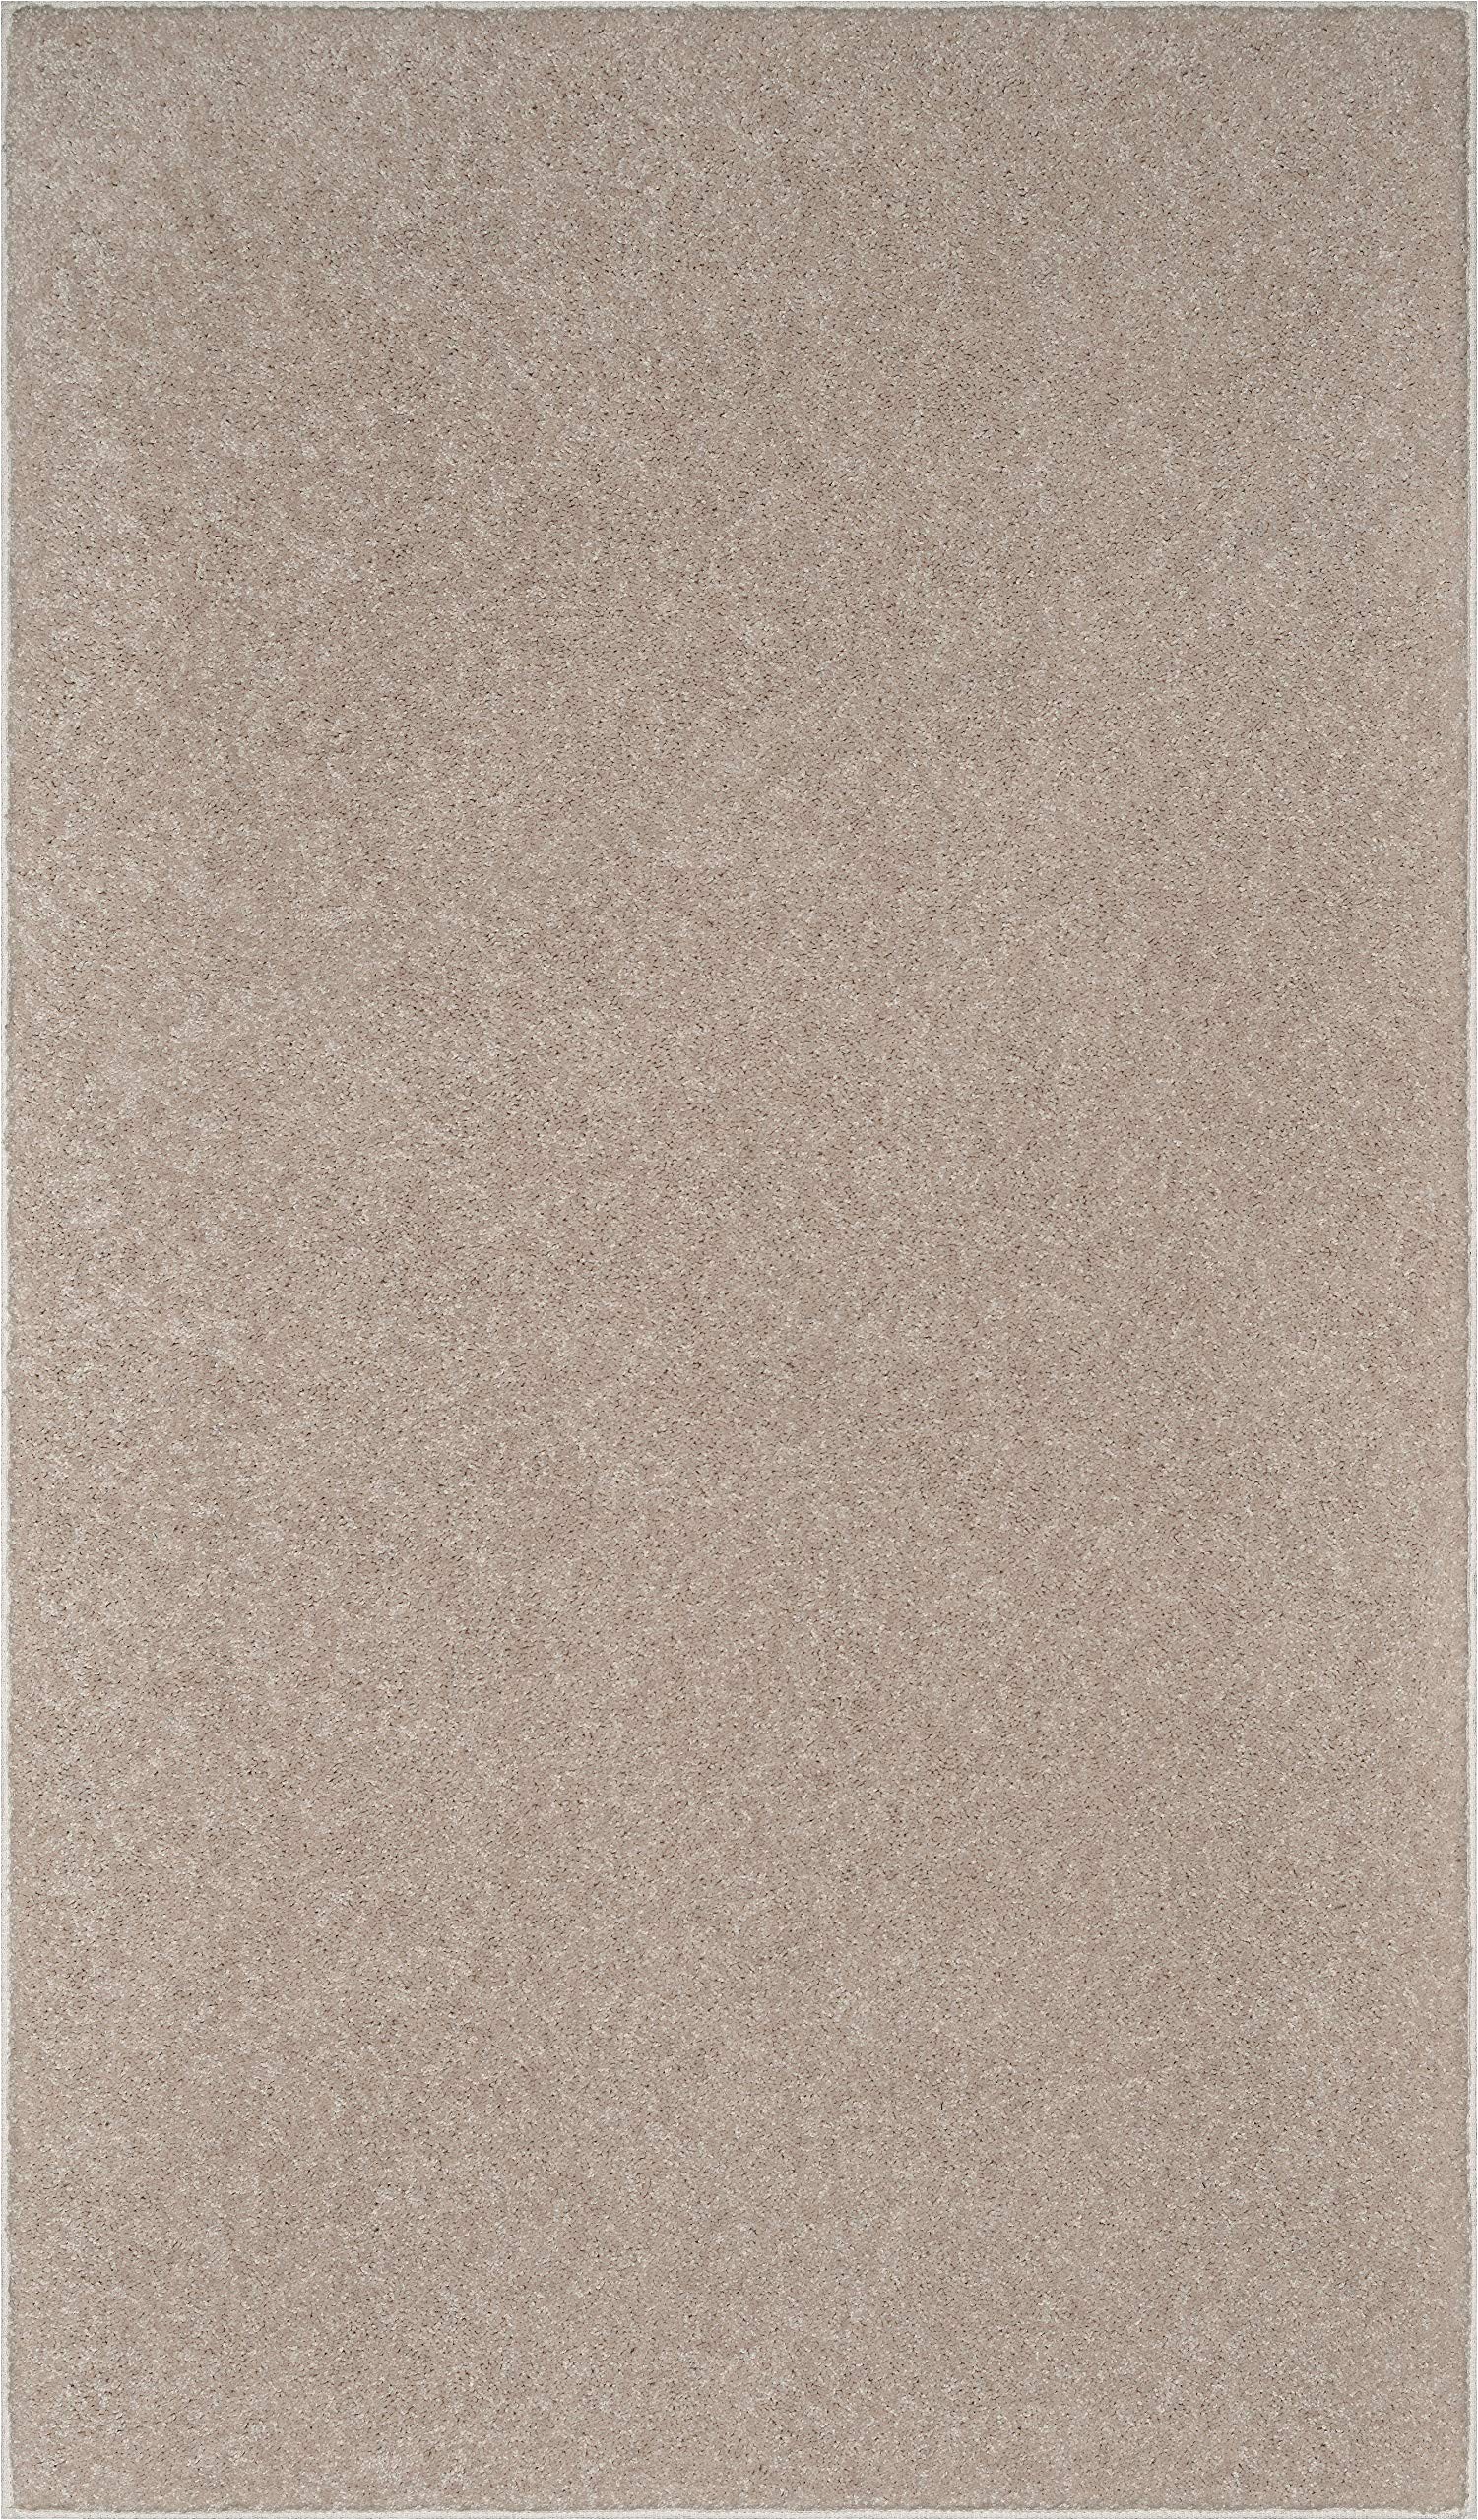 Solid Color Textured area Rugs Bright House solid Color area Rug Beige 2 X 3